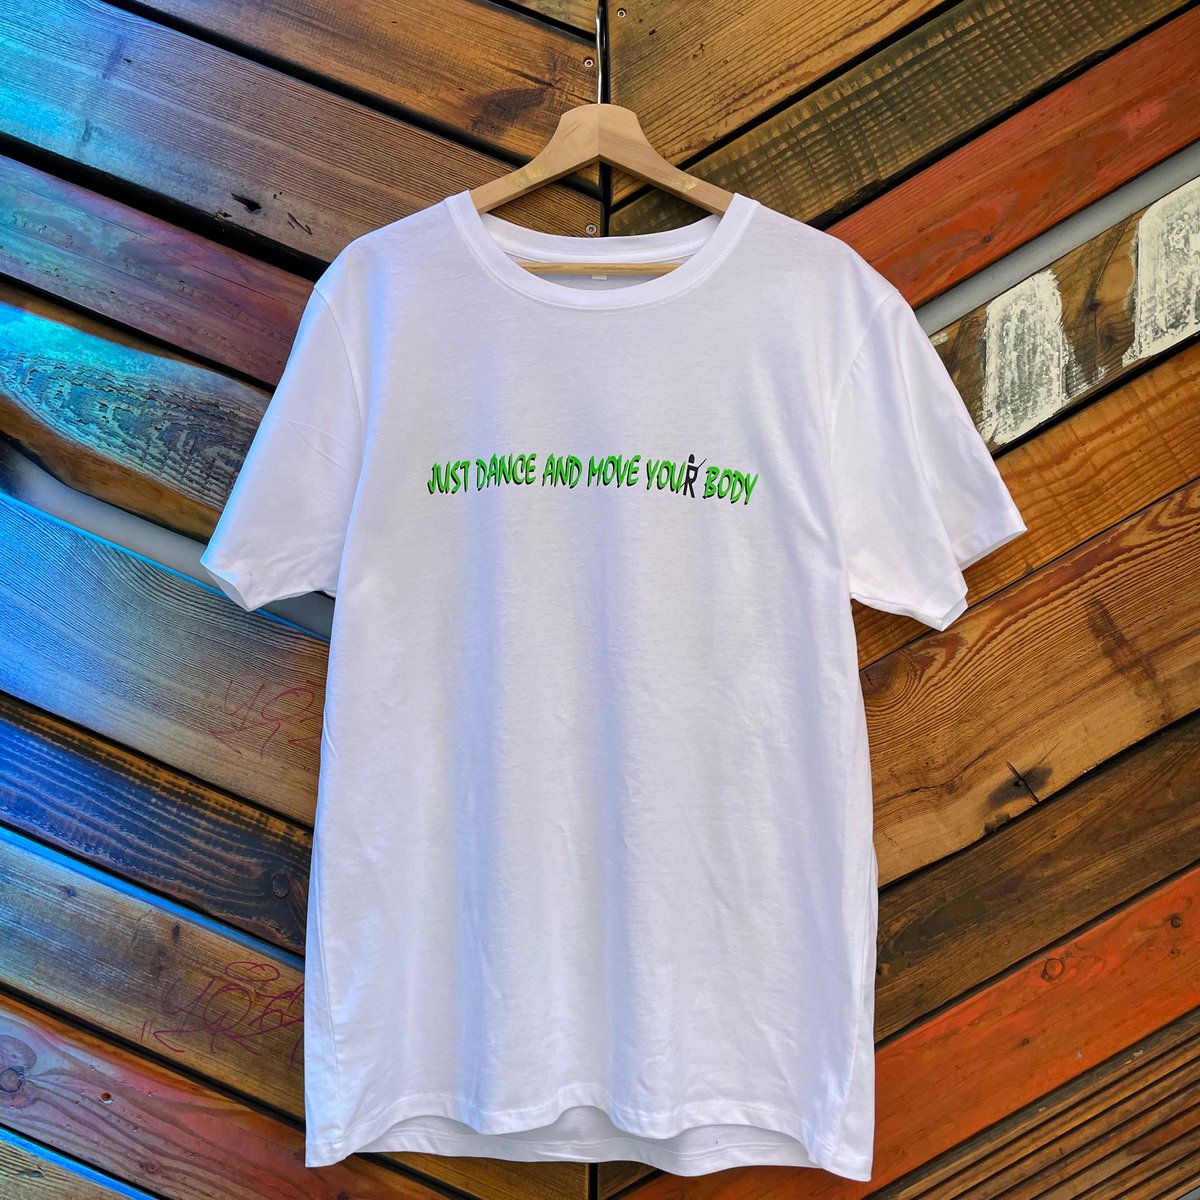  "JUST DANCE" Shirt - Designed by Niconé 